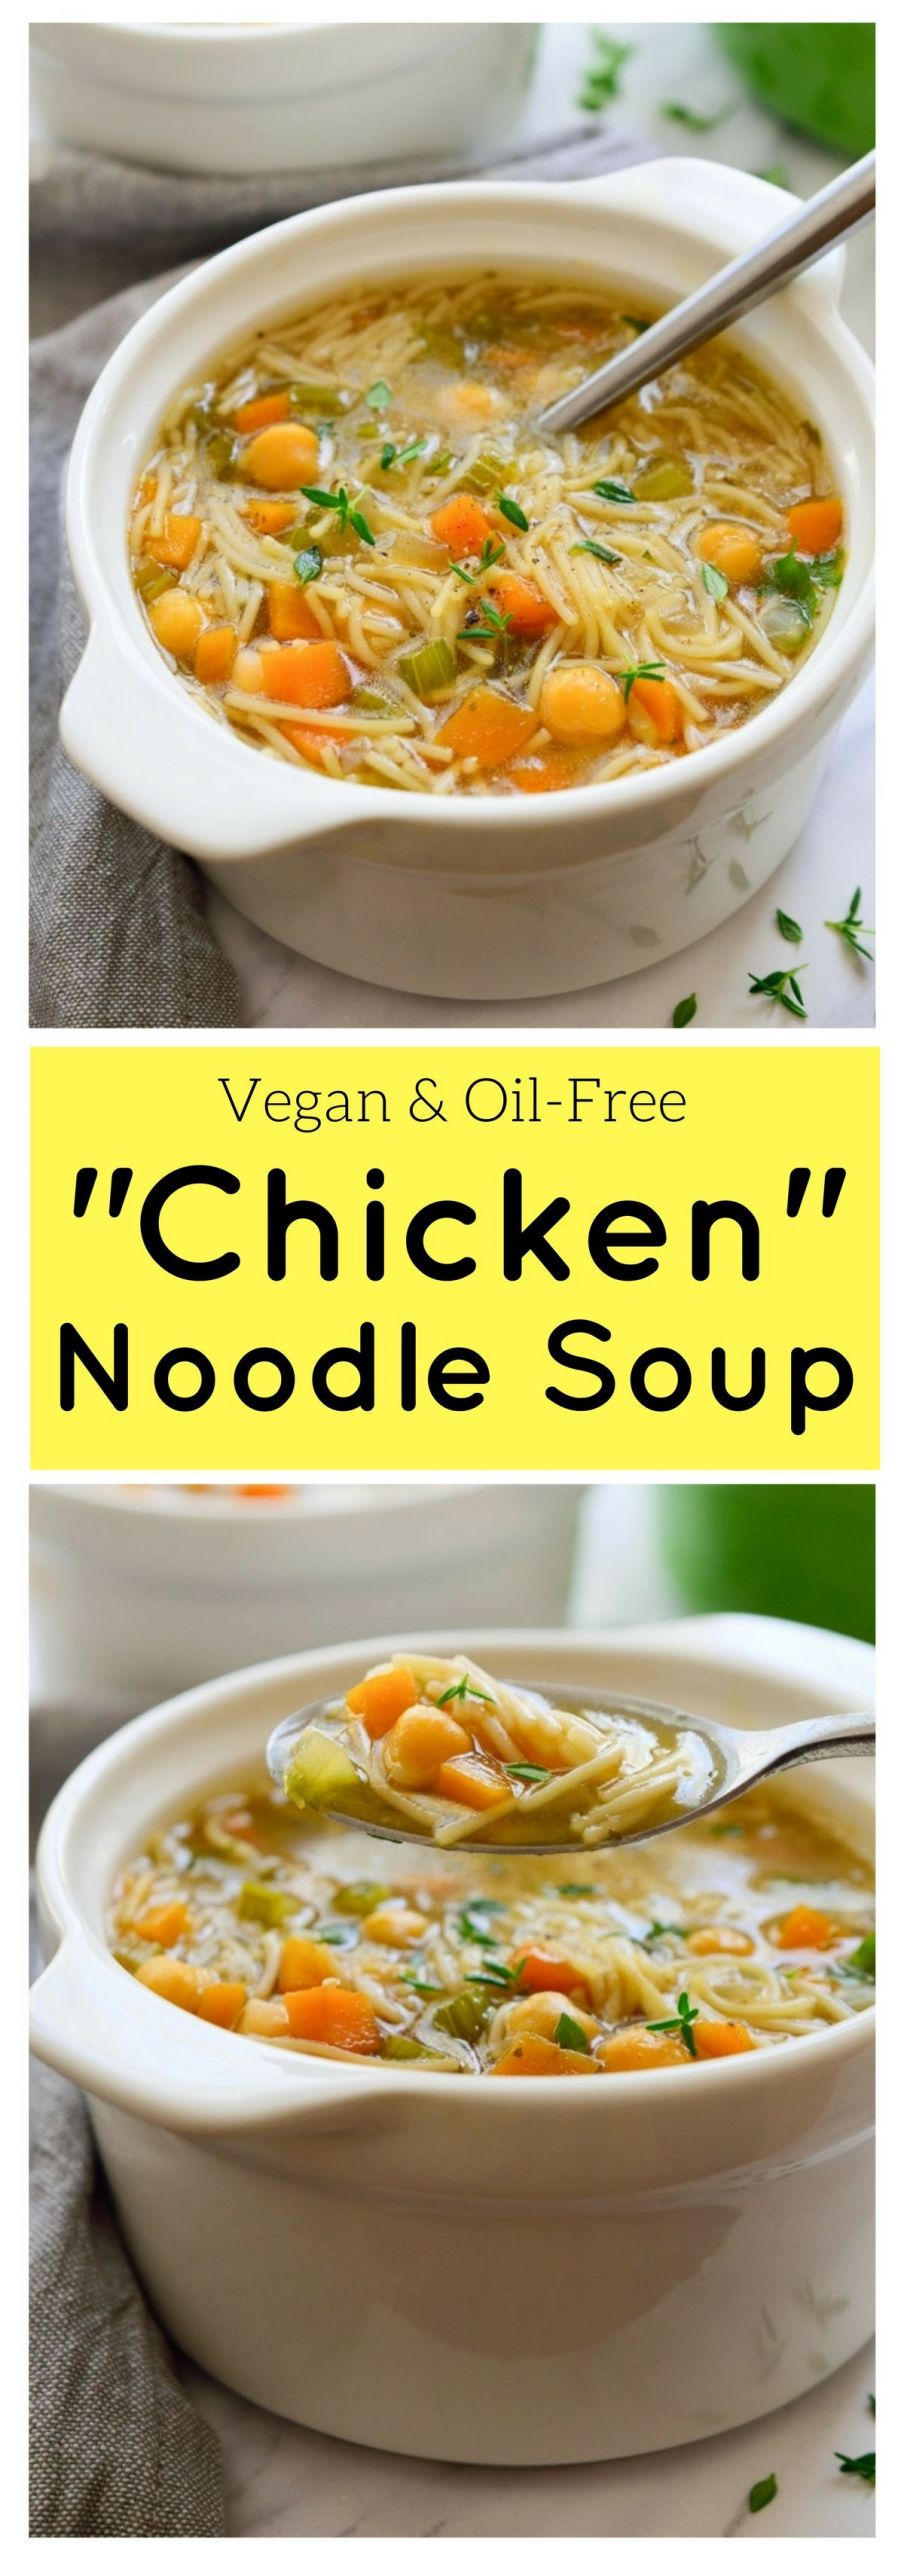 Vegetarian Chicken Noodle Soup Recipes
 This vegan chicken noodle soup is full of all the good